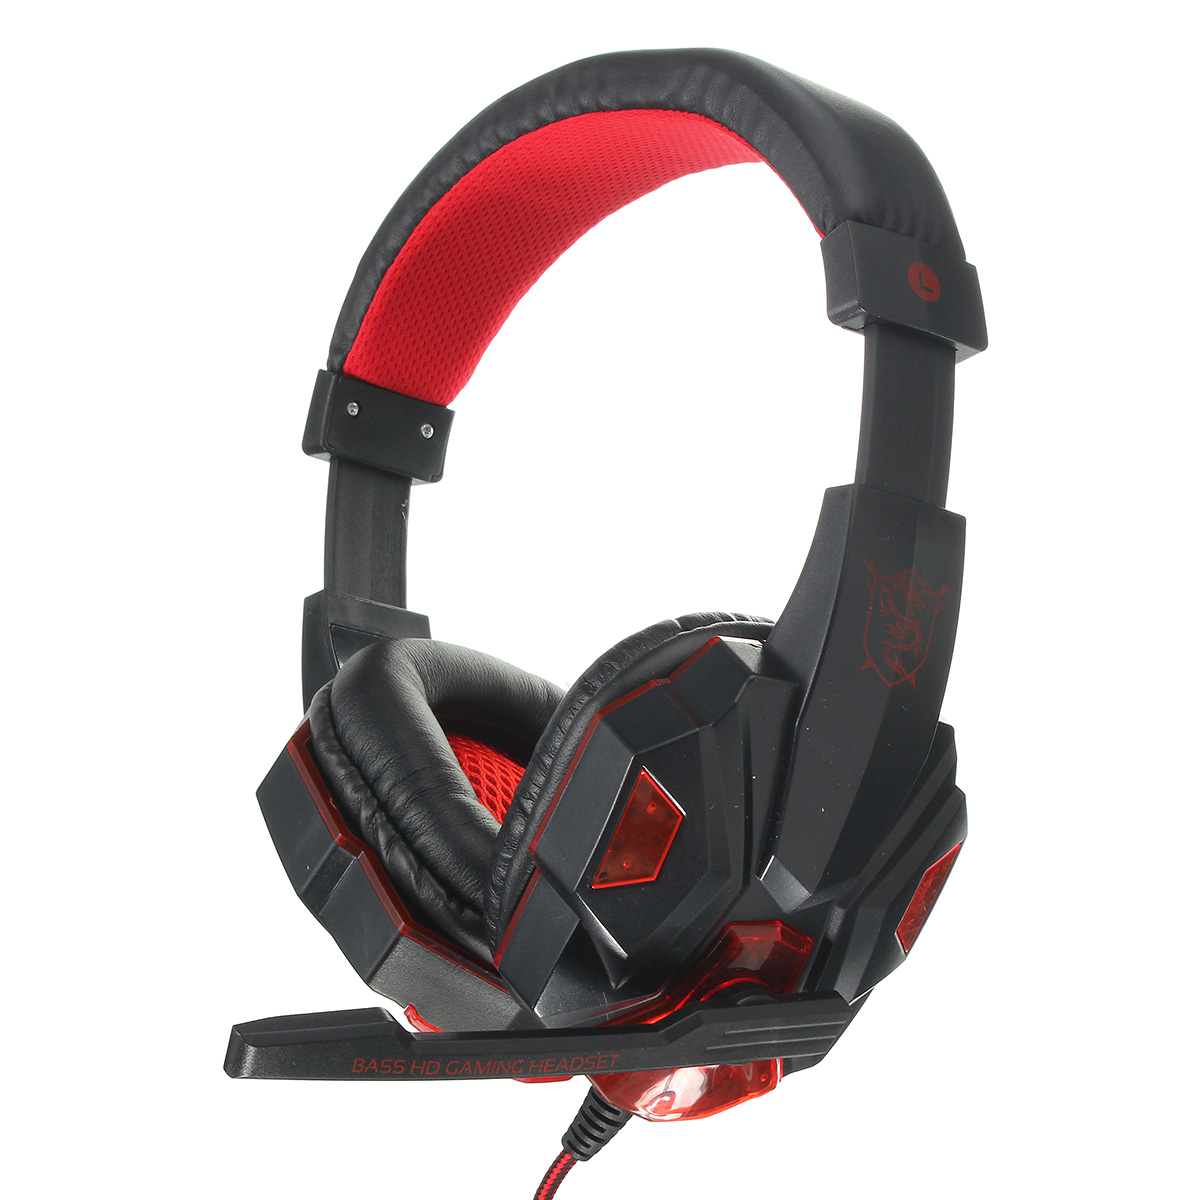 USB-35mm-LED-Surround-Stereo-Gaming-Headset-Headbrand-Headphone-With-Mic-1164073-2